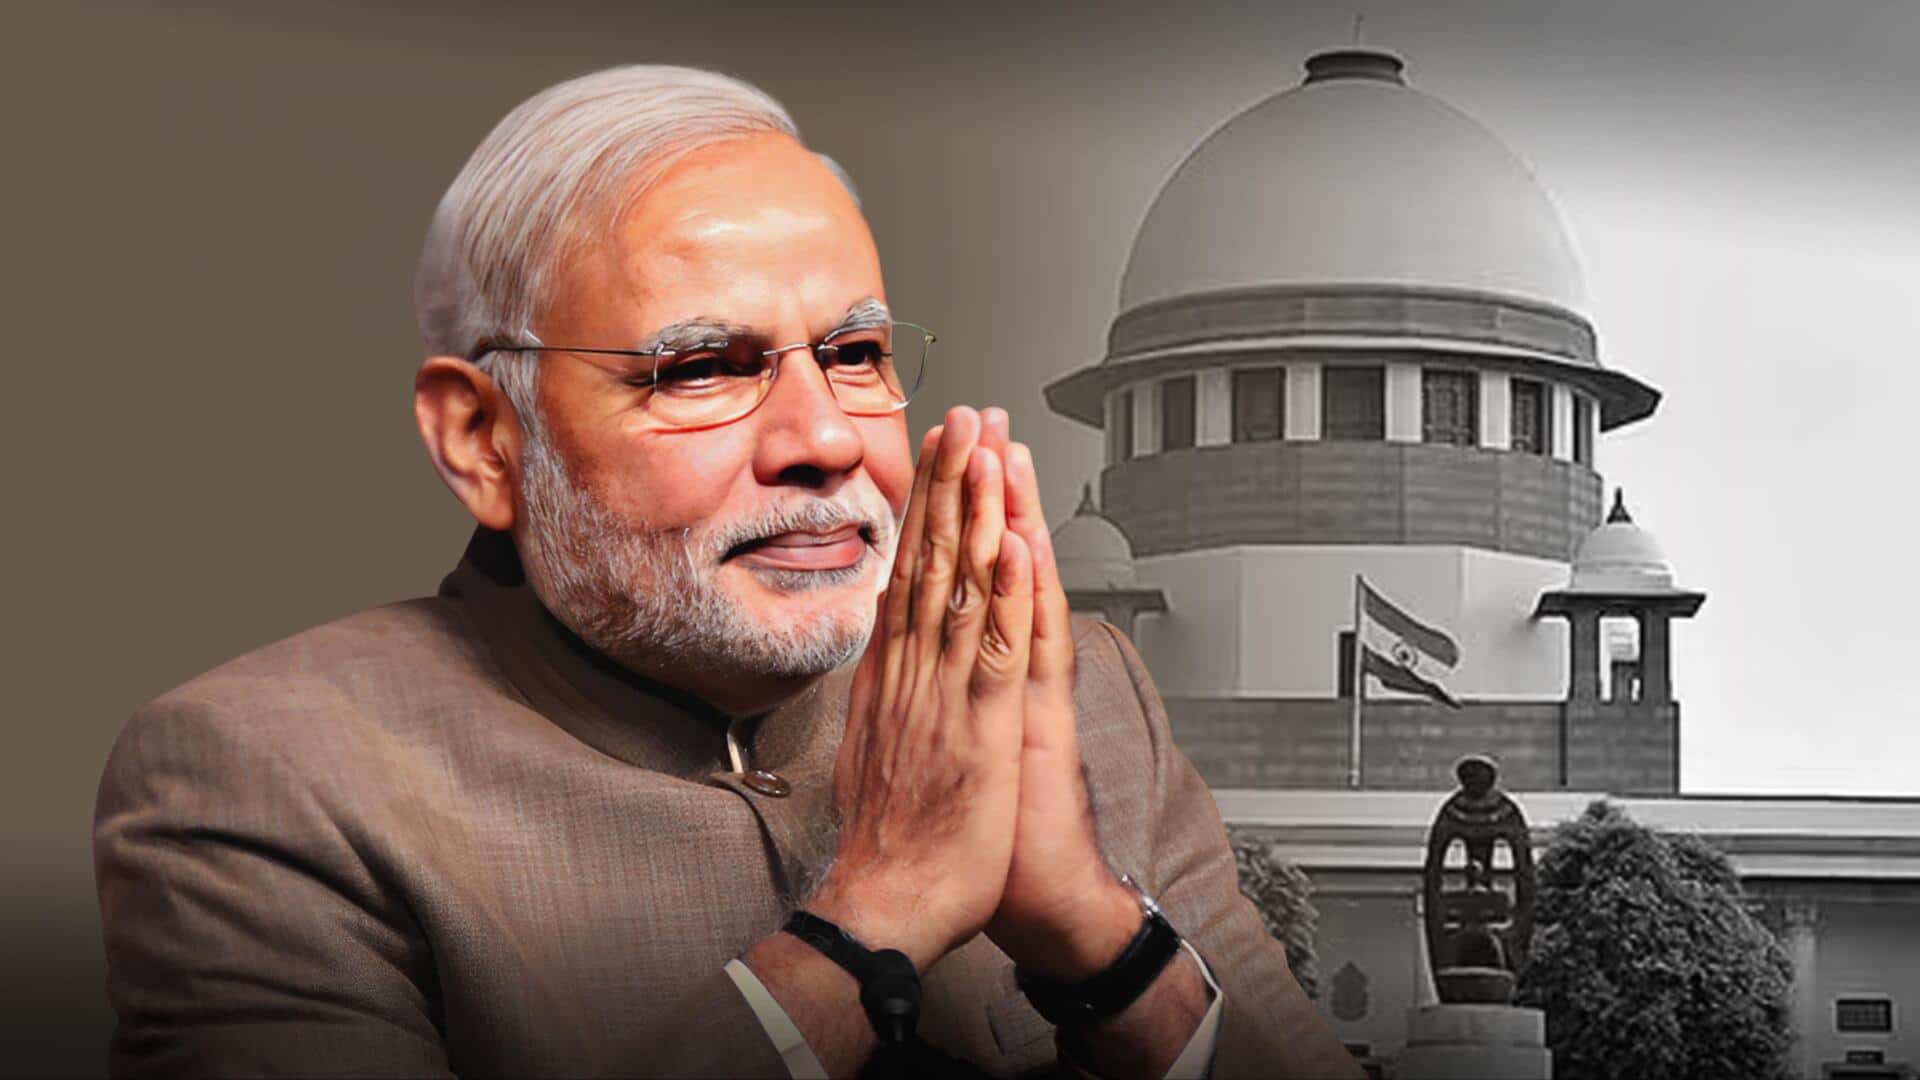 'Beacon of hope': Modi after SC upholds Article 370 abrogation